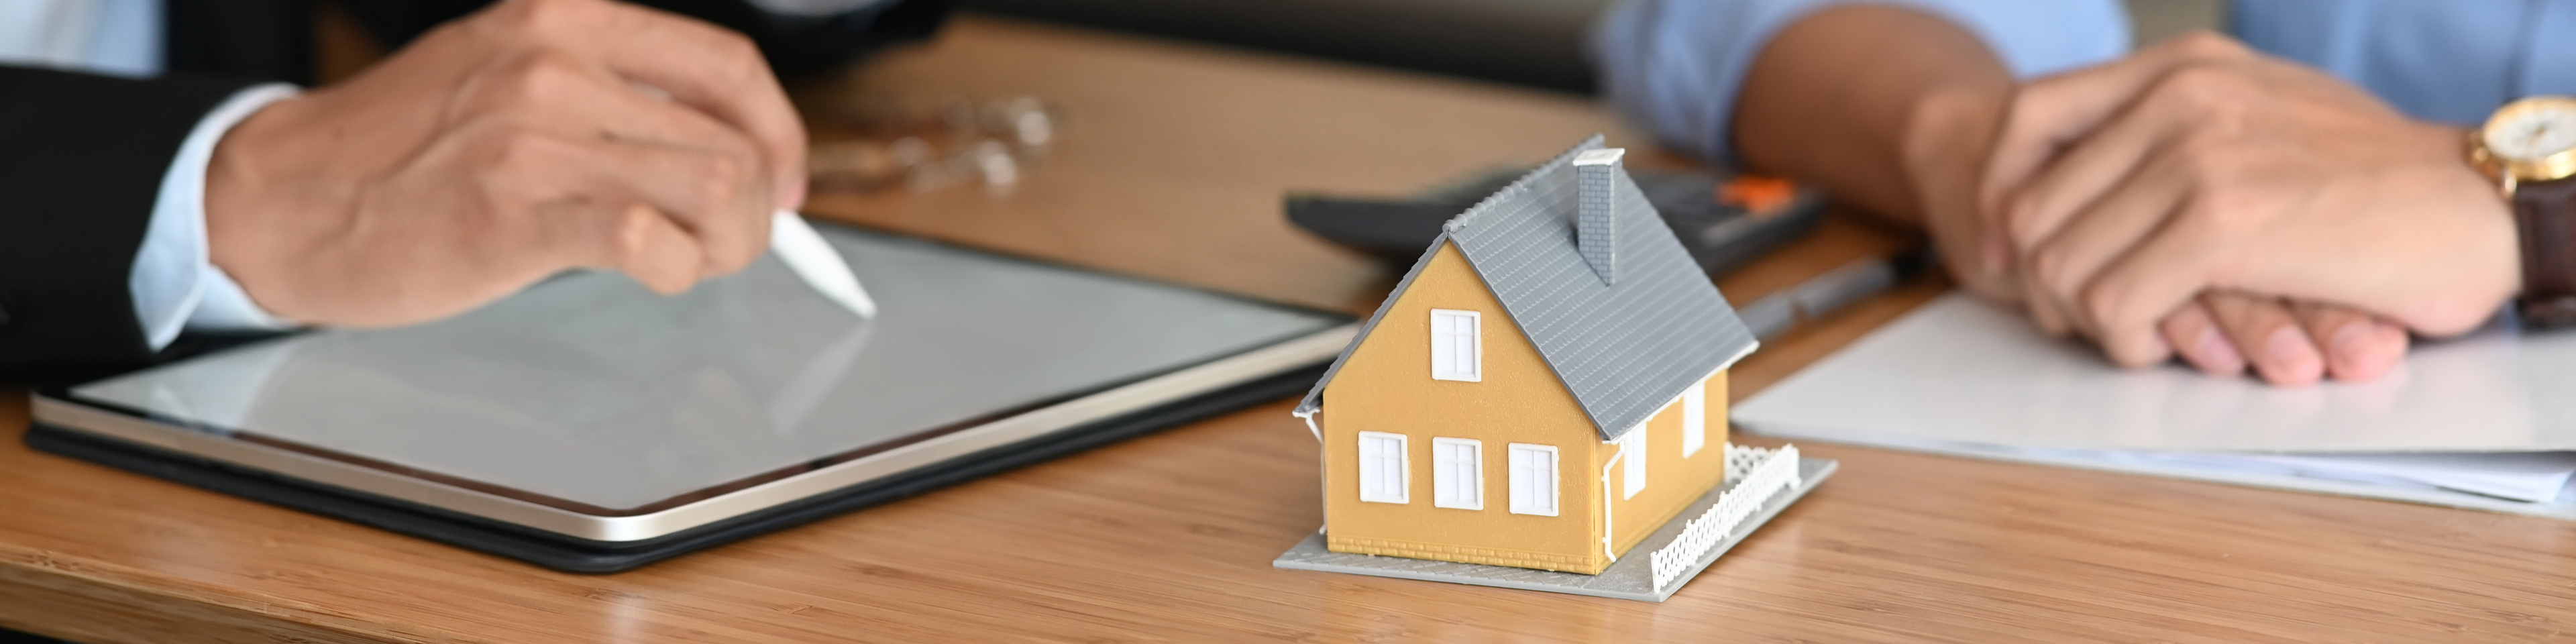 Produce mortgage documents with ease